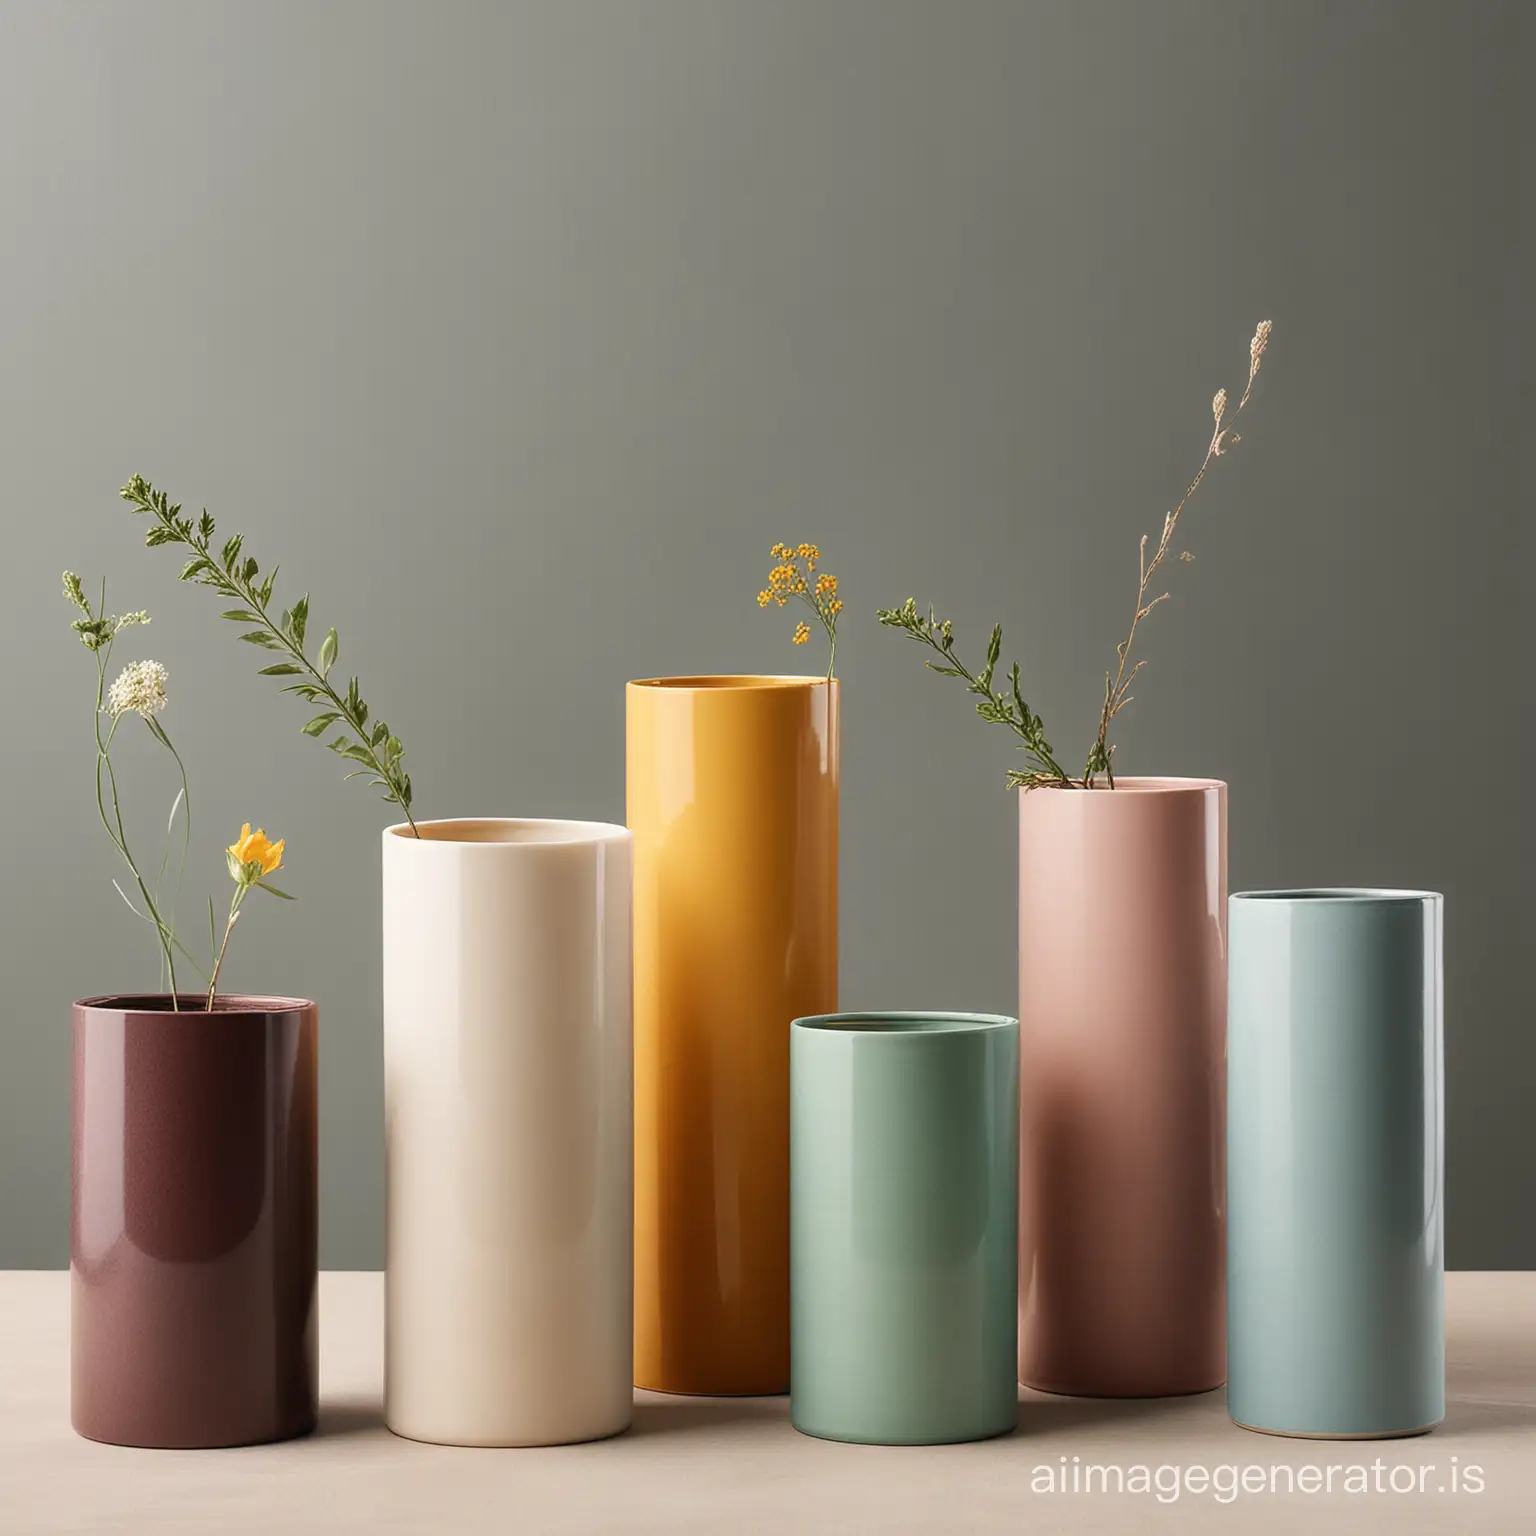 a variety of cylinder vases made of different types of materials and colors